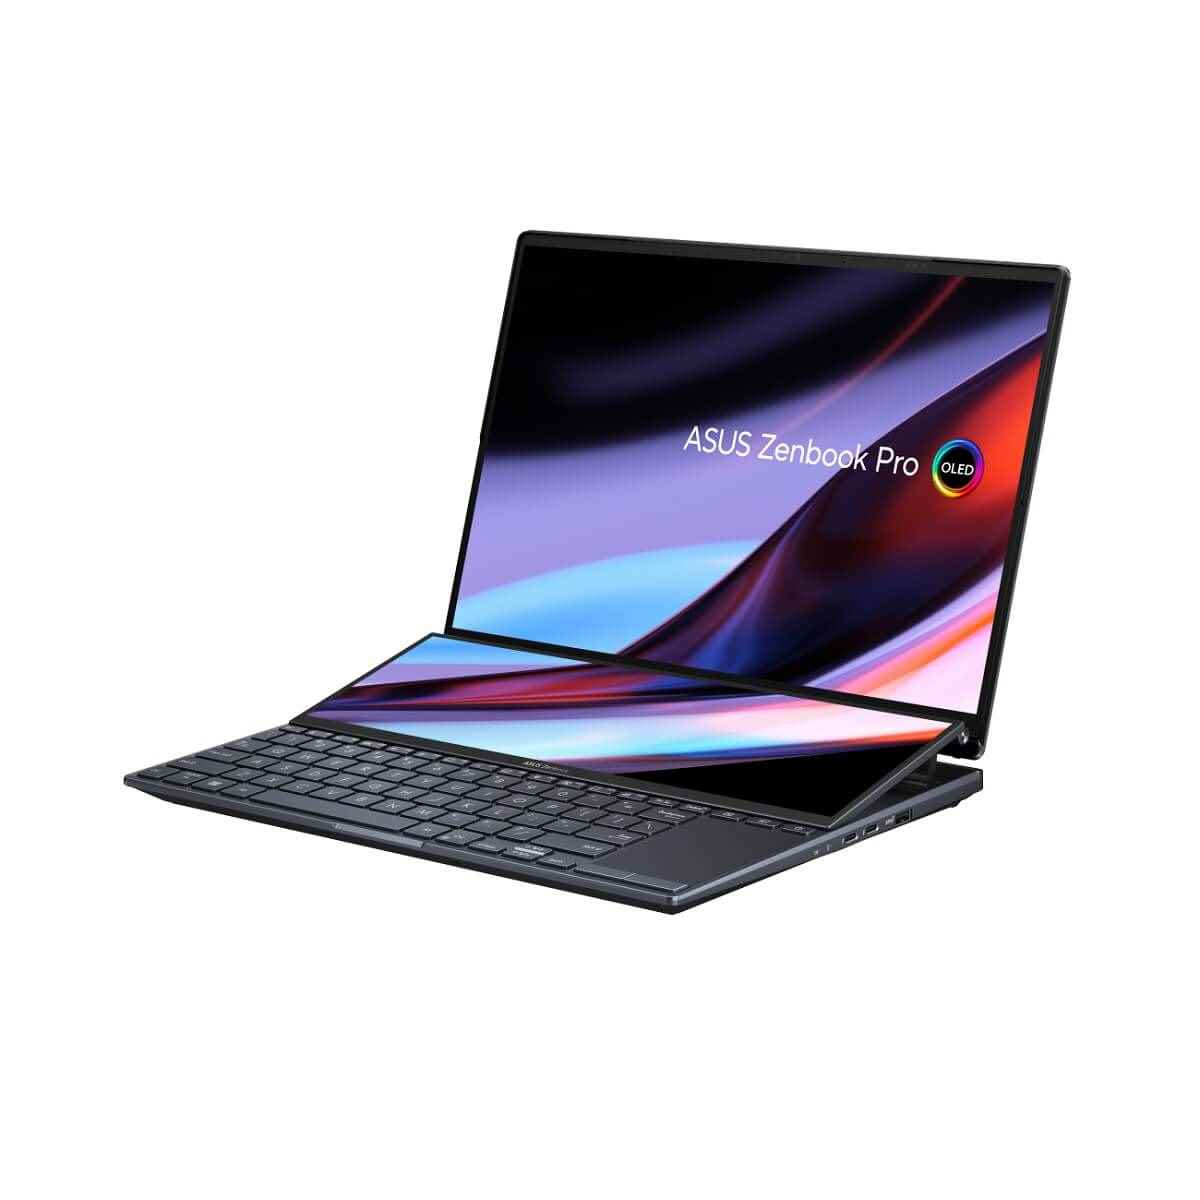 1663056097 355 A new dual screen PC from ASUS Zenbook Pro 14 Duo